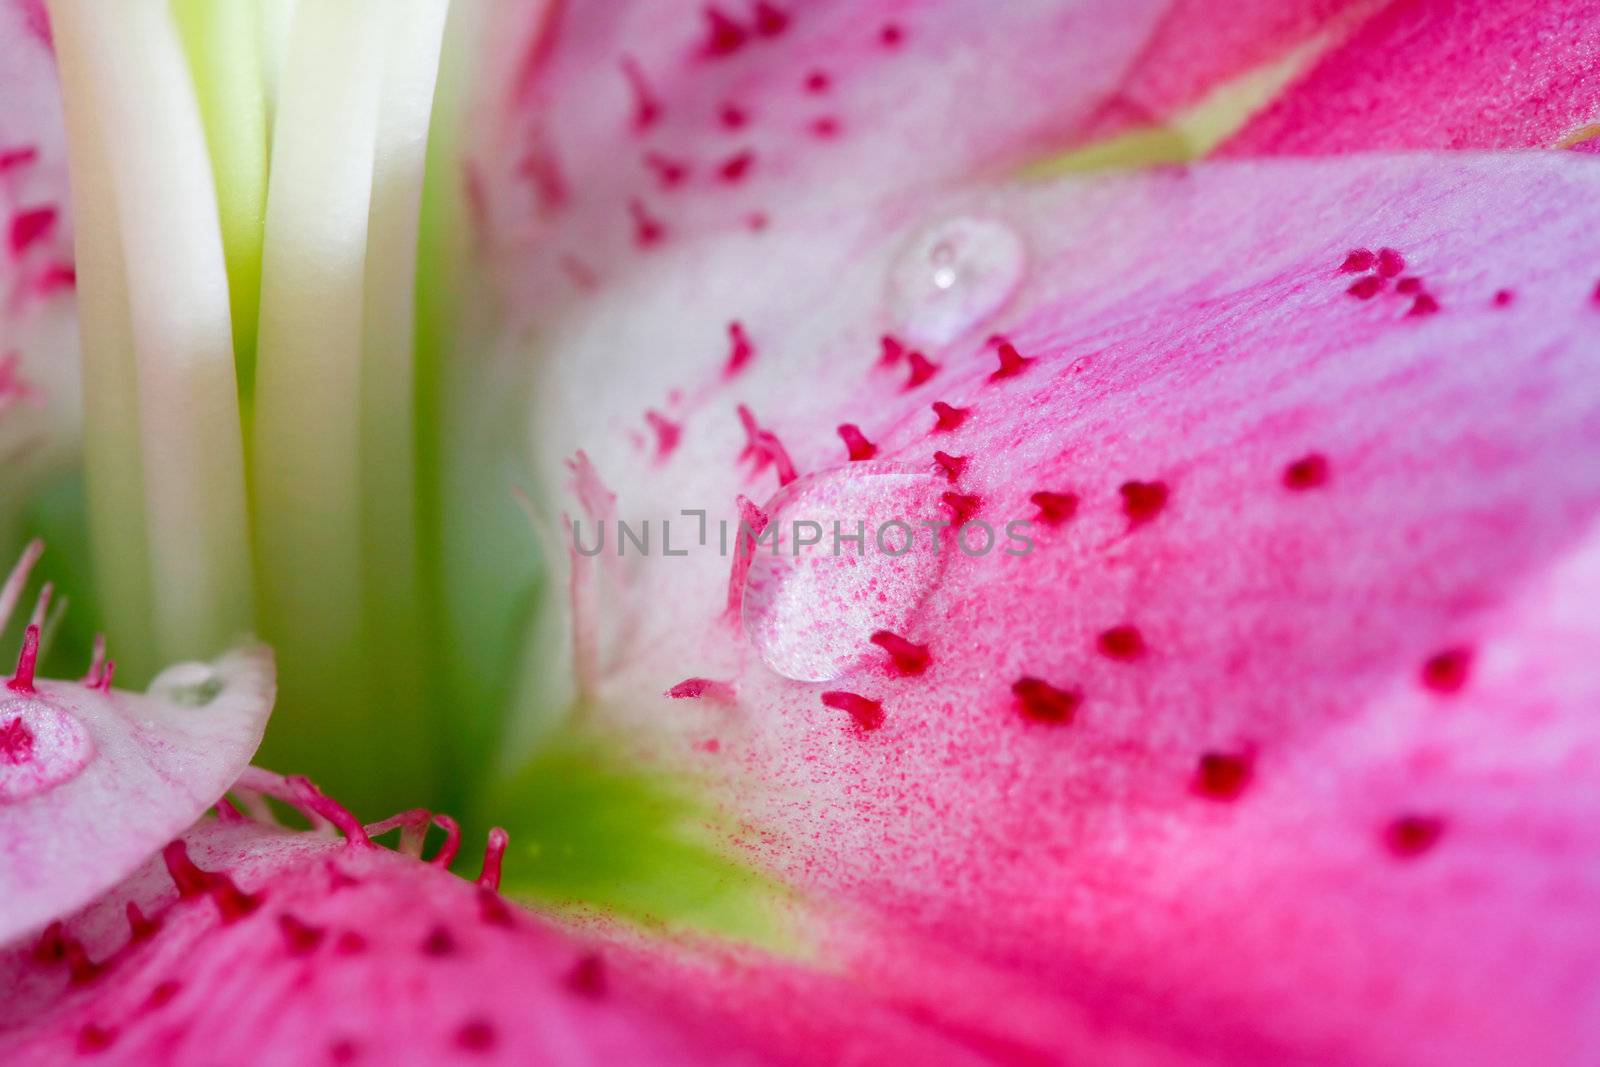 Abstract background of flower: image of petal closeup with drop